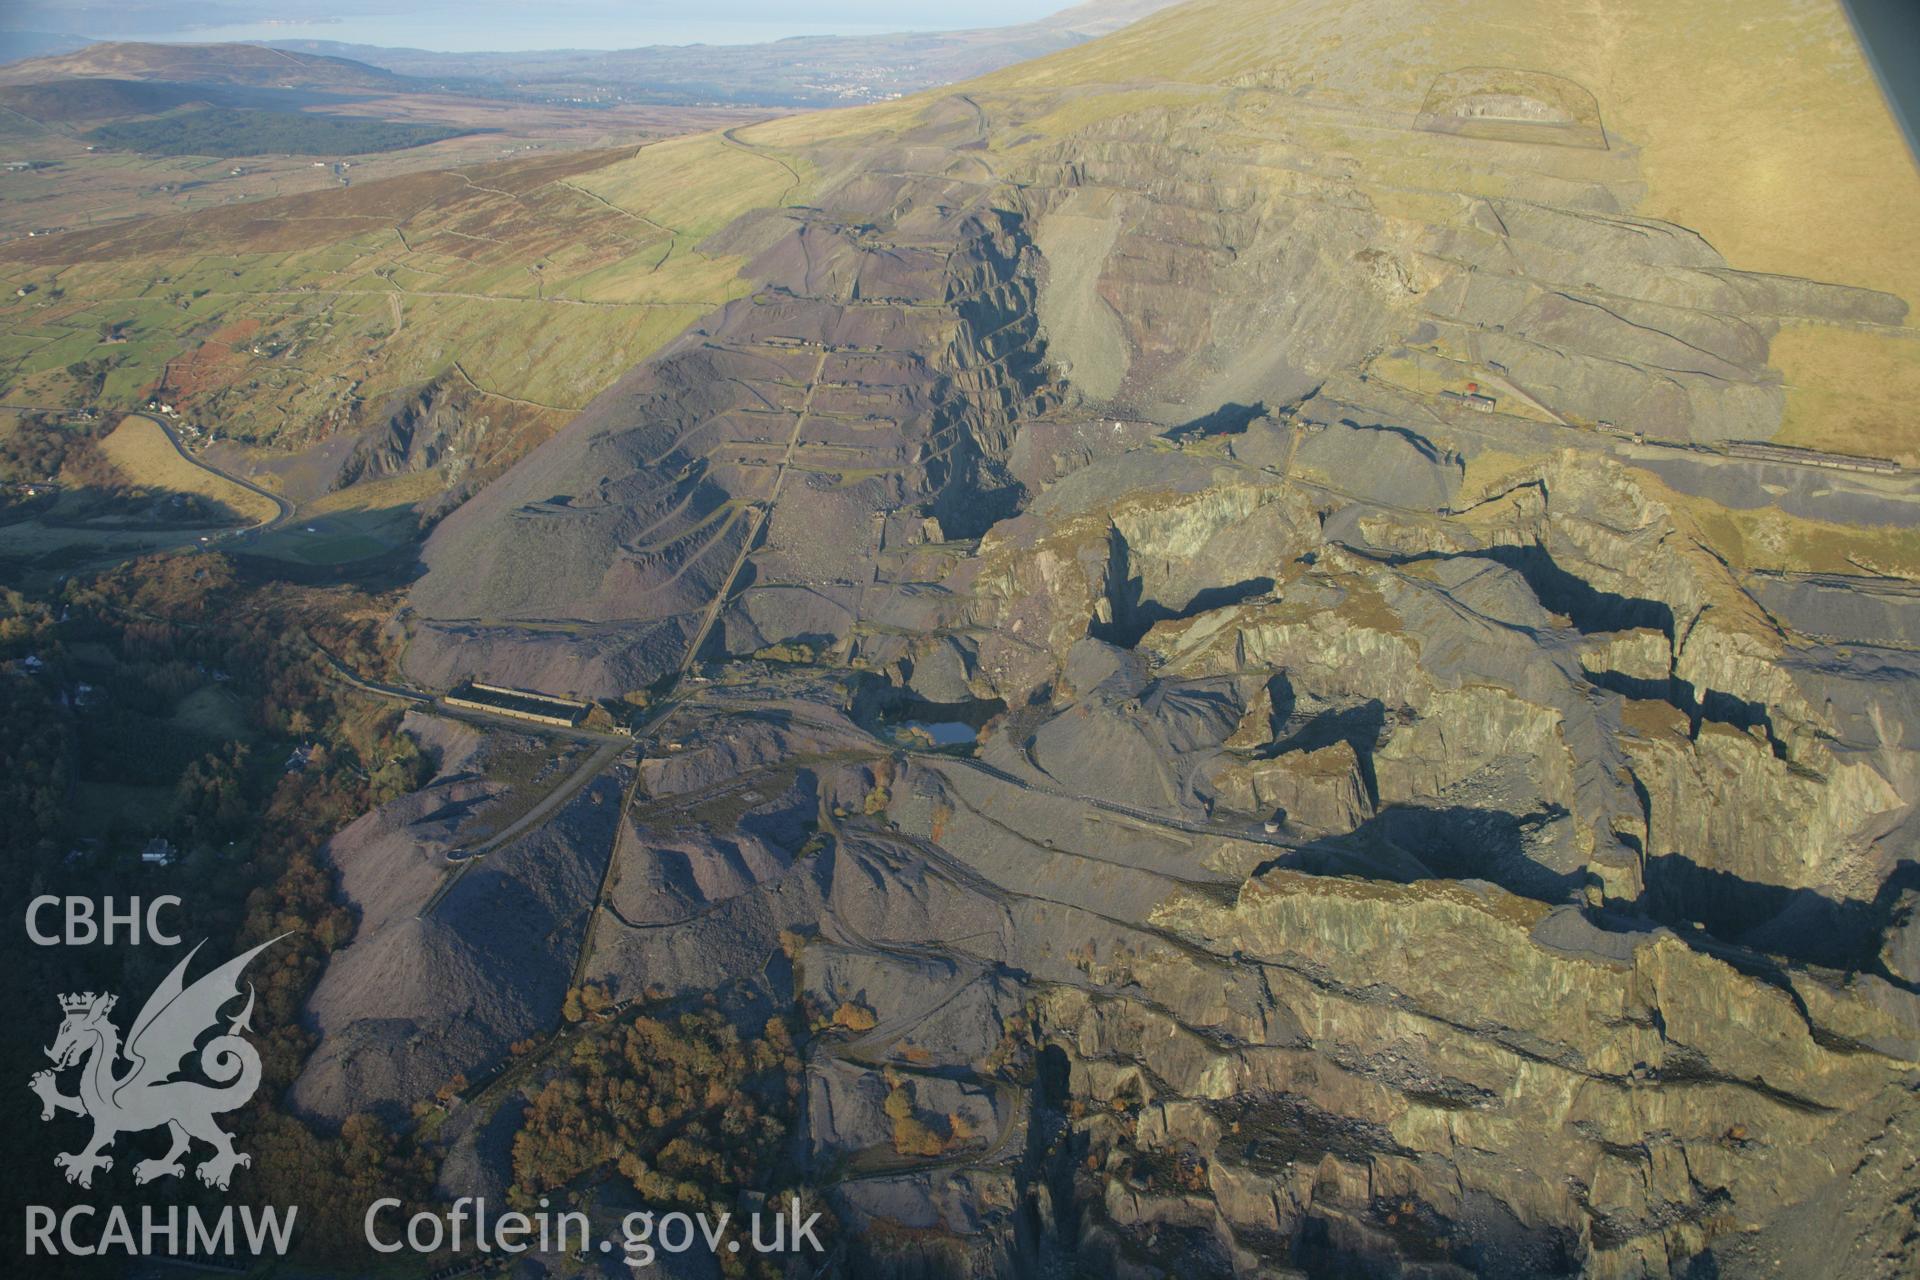 RCAHMW colour oblique aerial photograph of Dinorwic Slate Quarry. A winter landscape view from the south-west. Taken on 21 November 2005 by Toby Driver